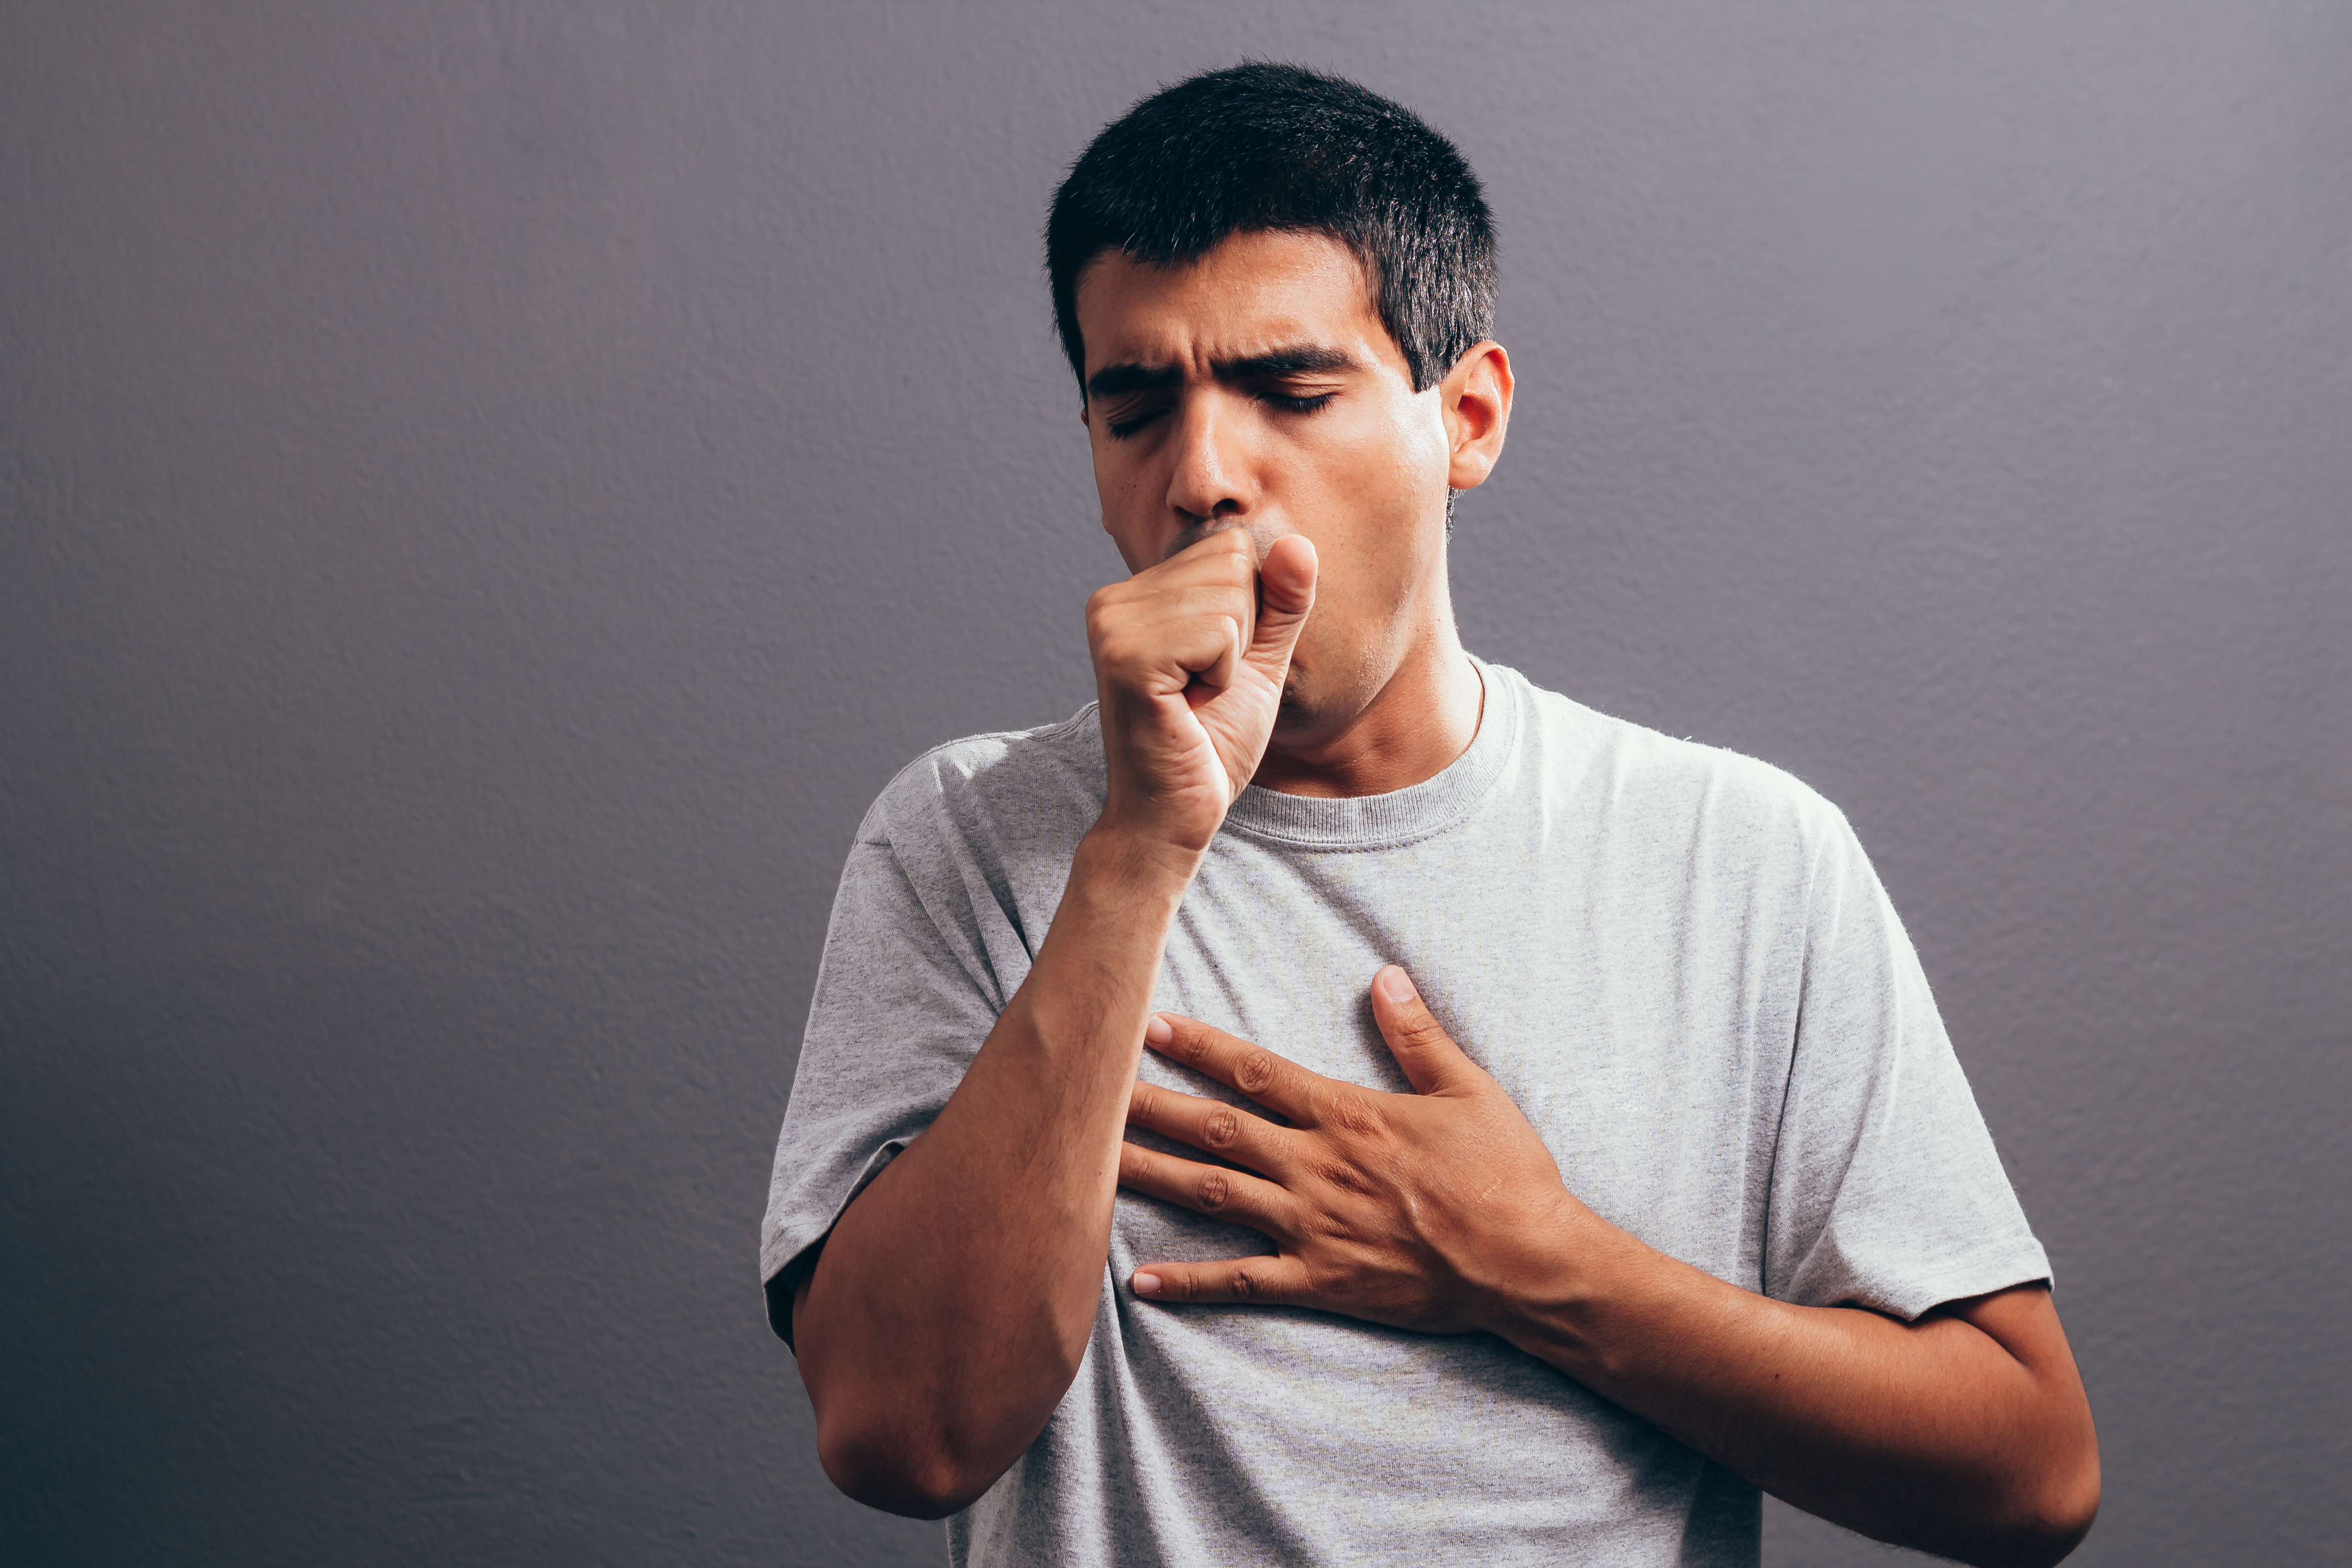 A person coughing. | Source: Shutterstock